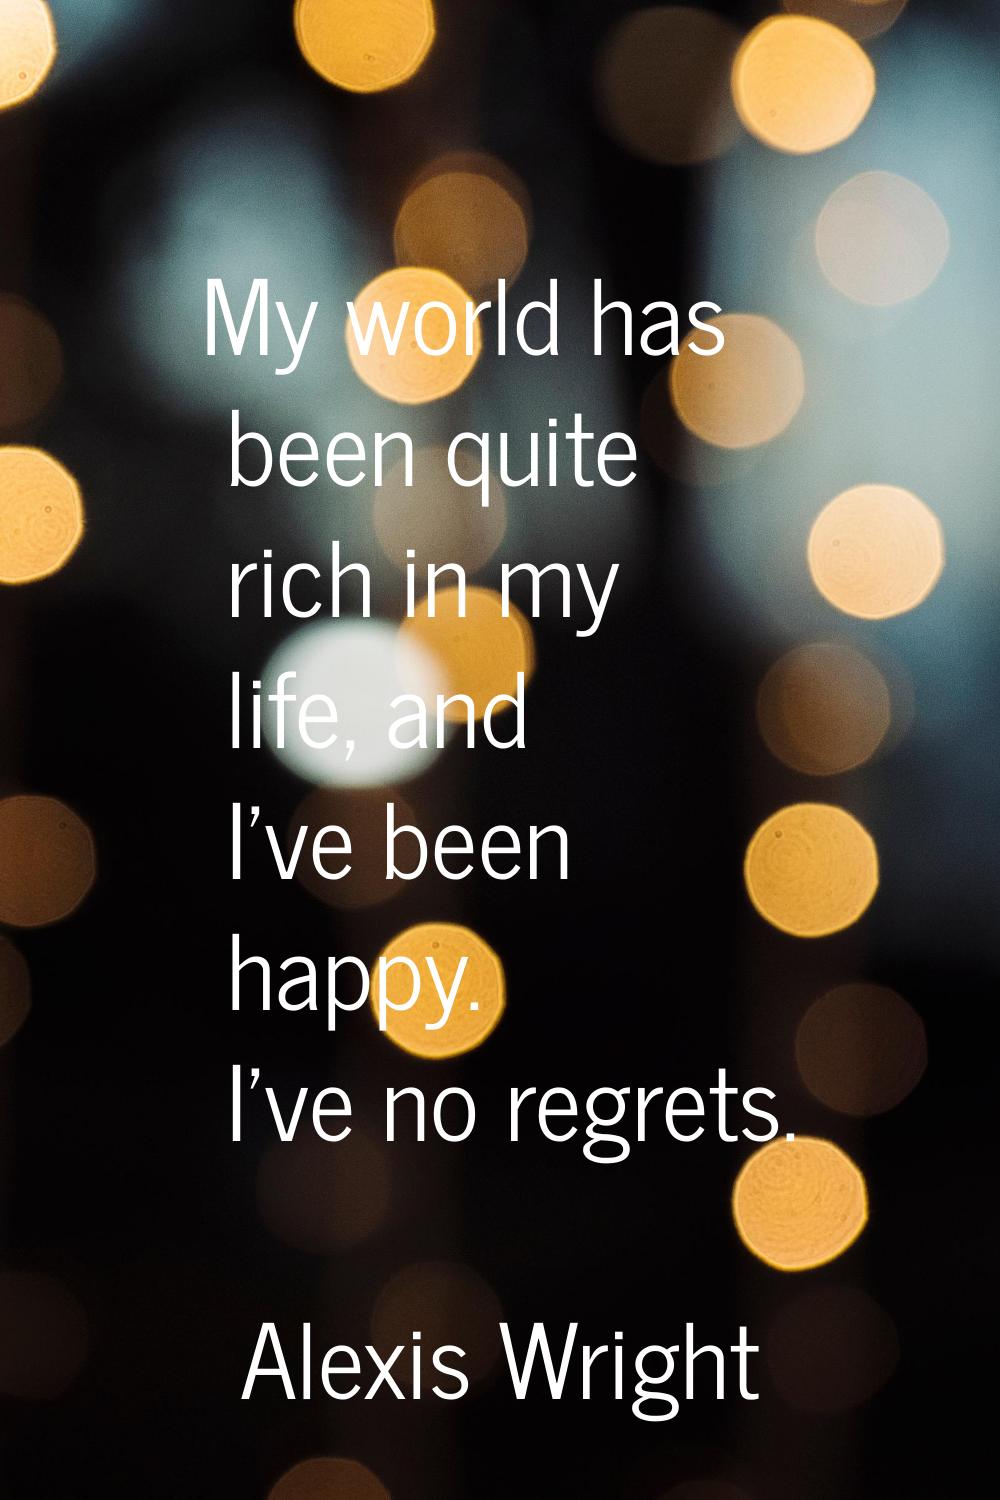 My world has been quite rich in my life, and I've been happy. I've no regrets.